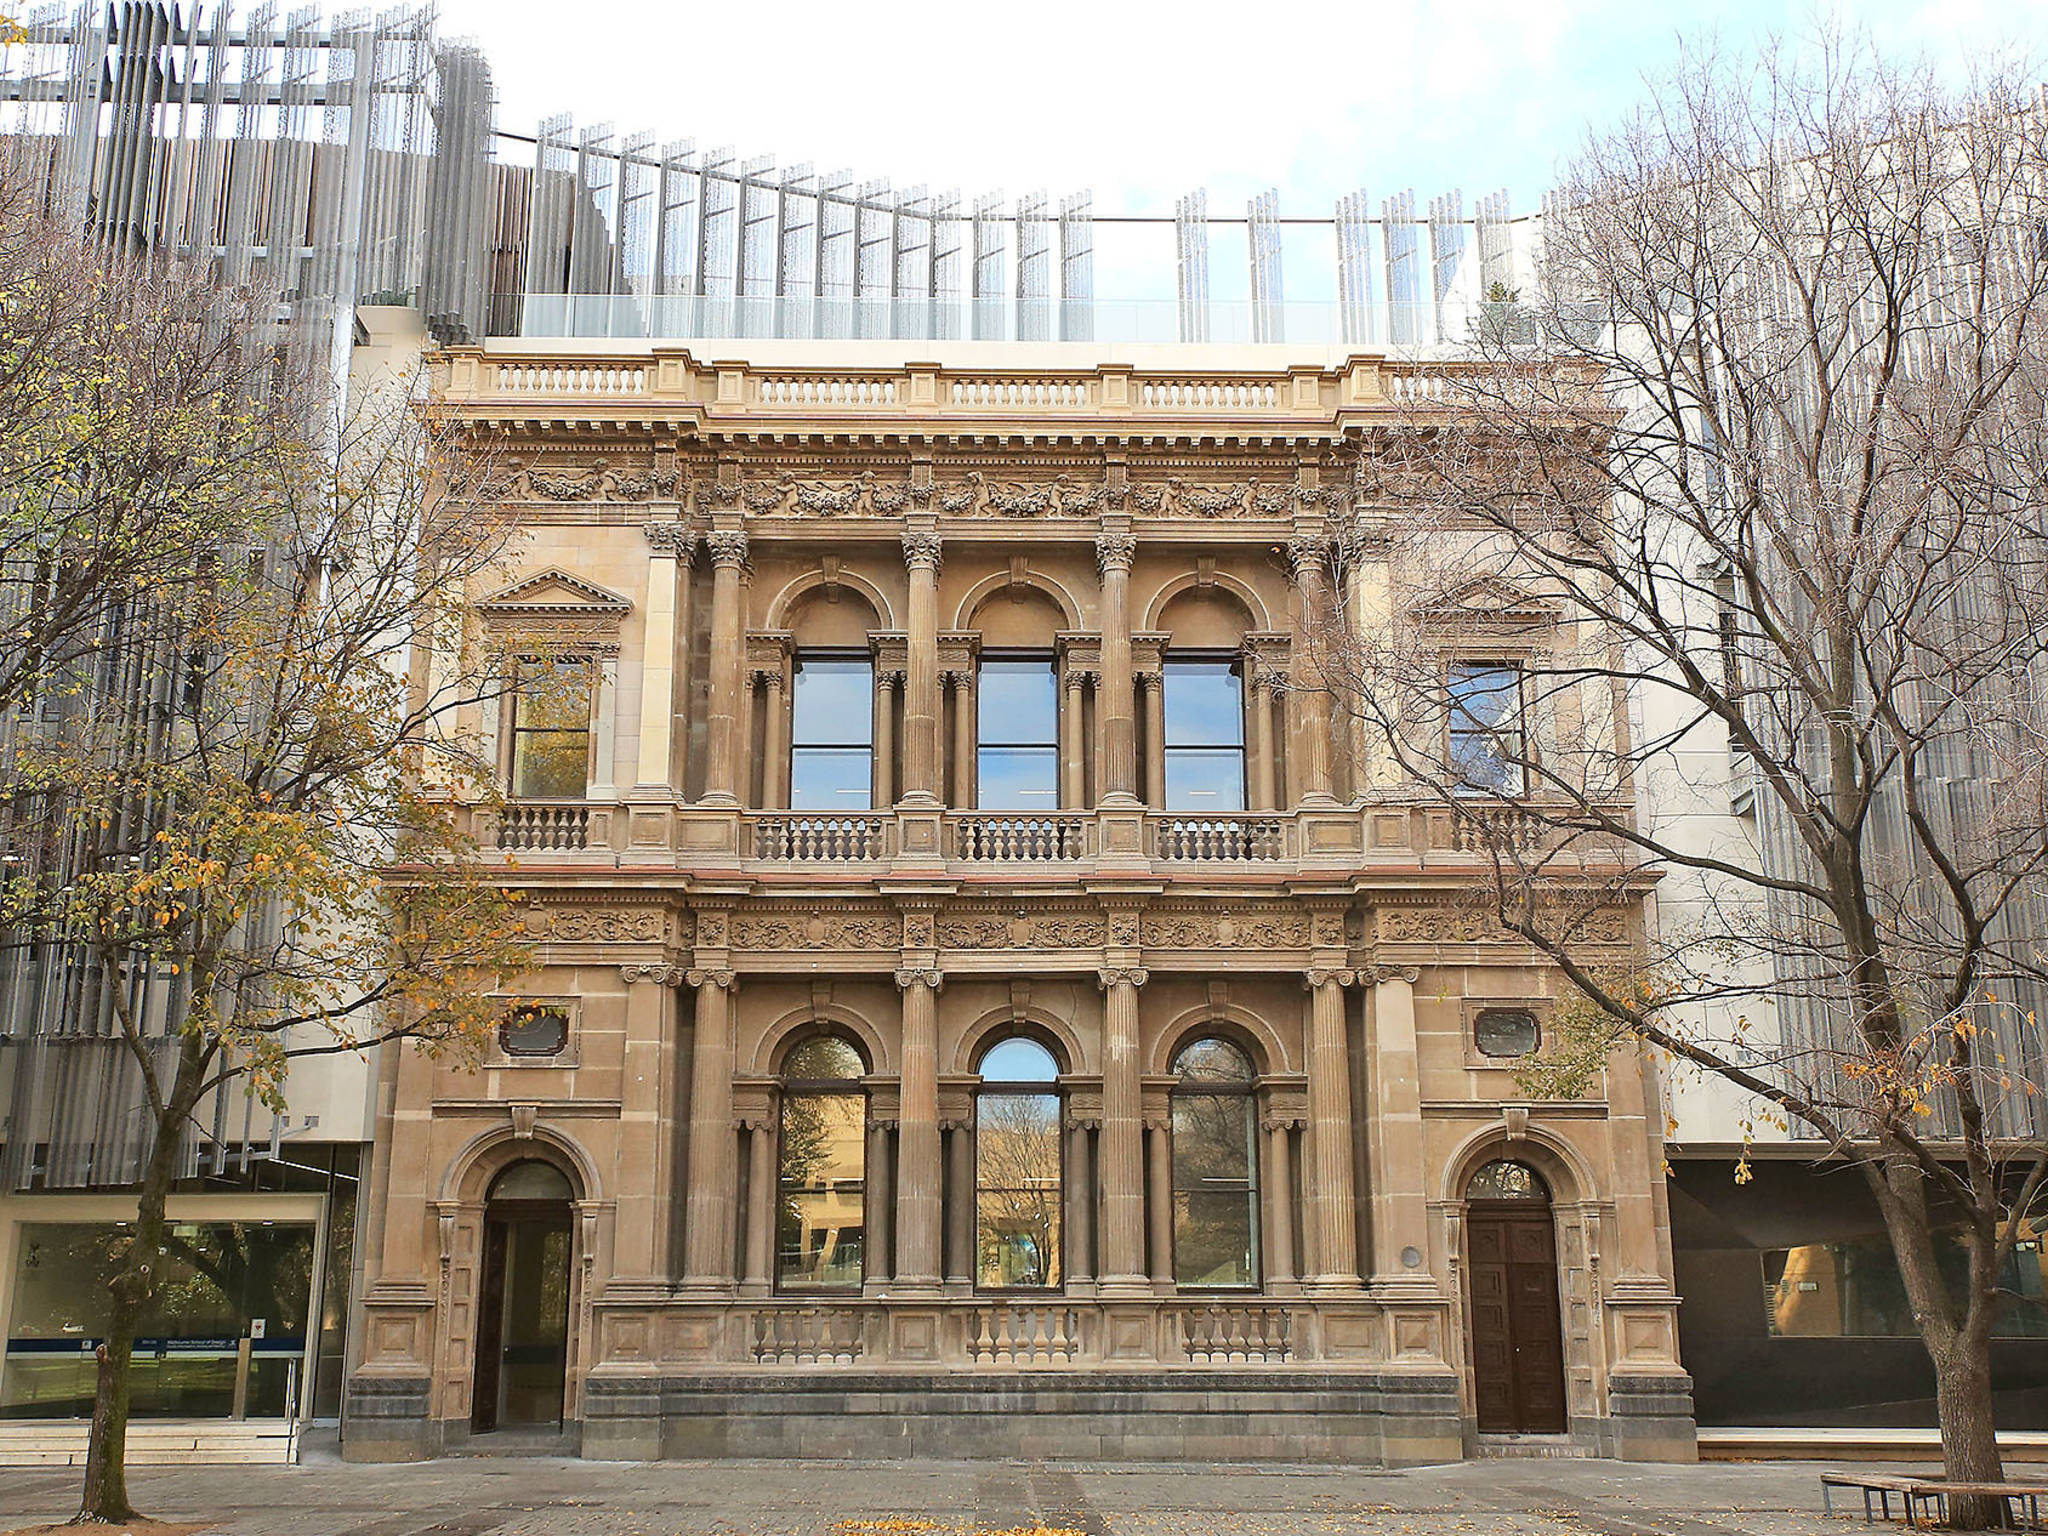 Open House Melbourne is back in July with 200 buildings to explore